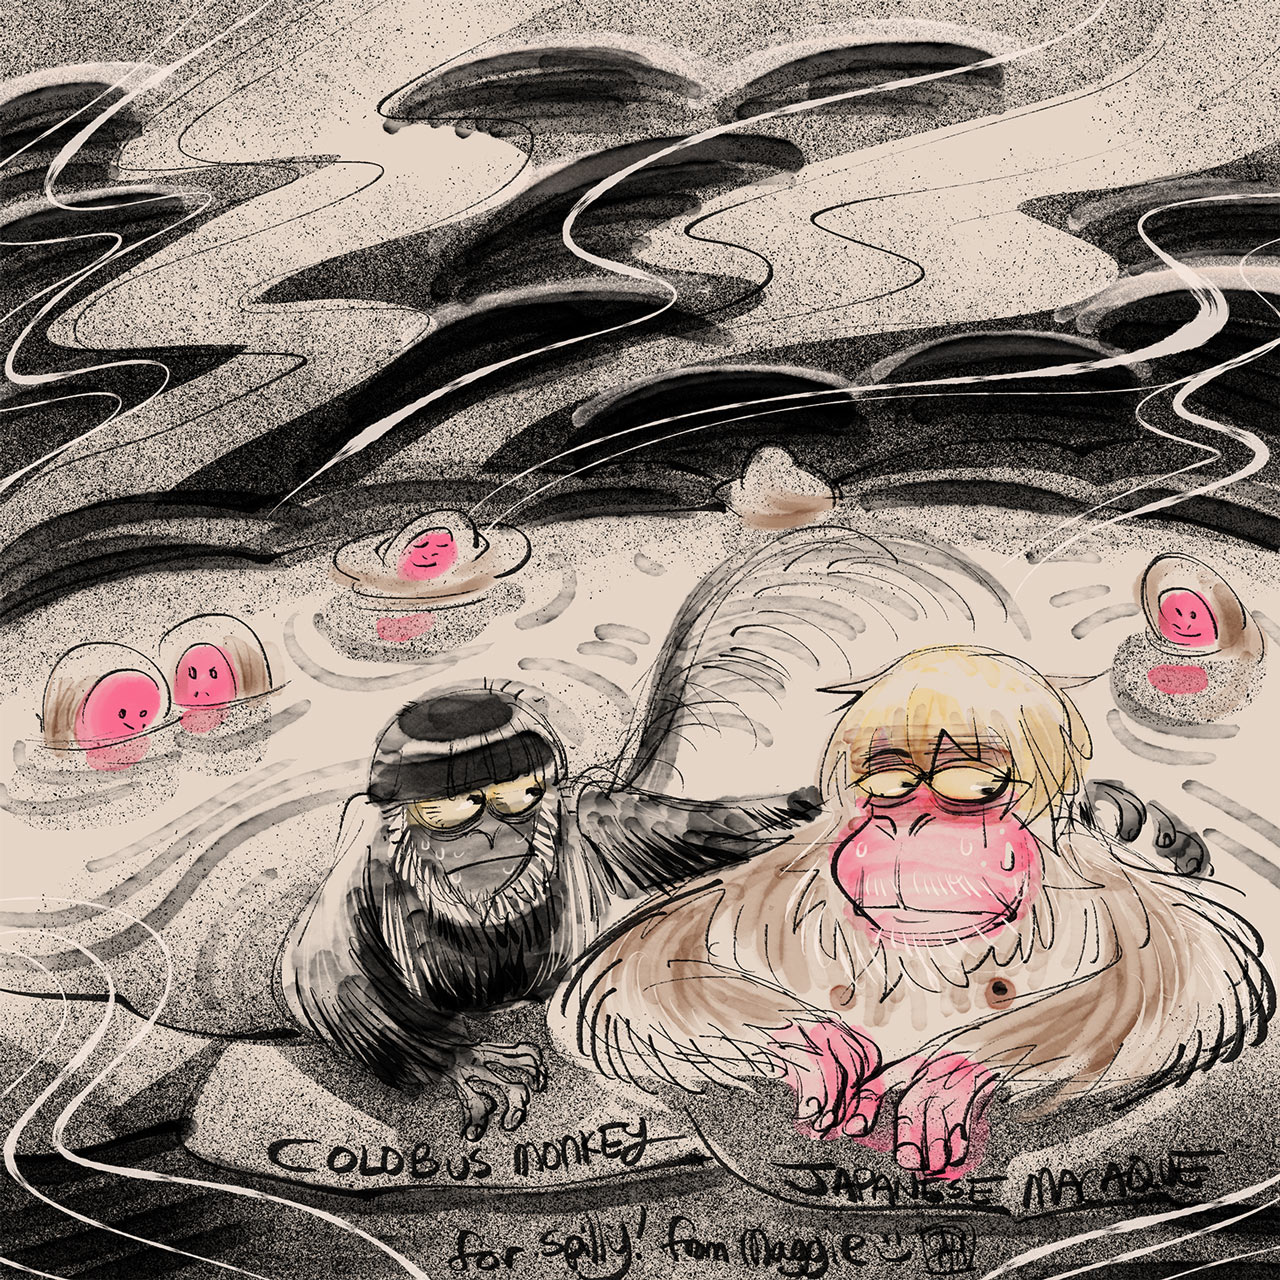 A drawing of monkeys chilling inside an onsen. One is a Colobus Monkey, black with a white beard, a long hairy tail, and bowl cut-like hair shape. The other is a Japanese Macaque, gold with bright pink skin. The Colobus monkey wraps one long arm around the macaque, which the other eyes wearily. Behind them is a bunch of other macaques enjoying the hot water. I stole this alt text from Spilly :D